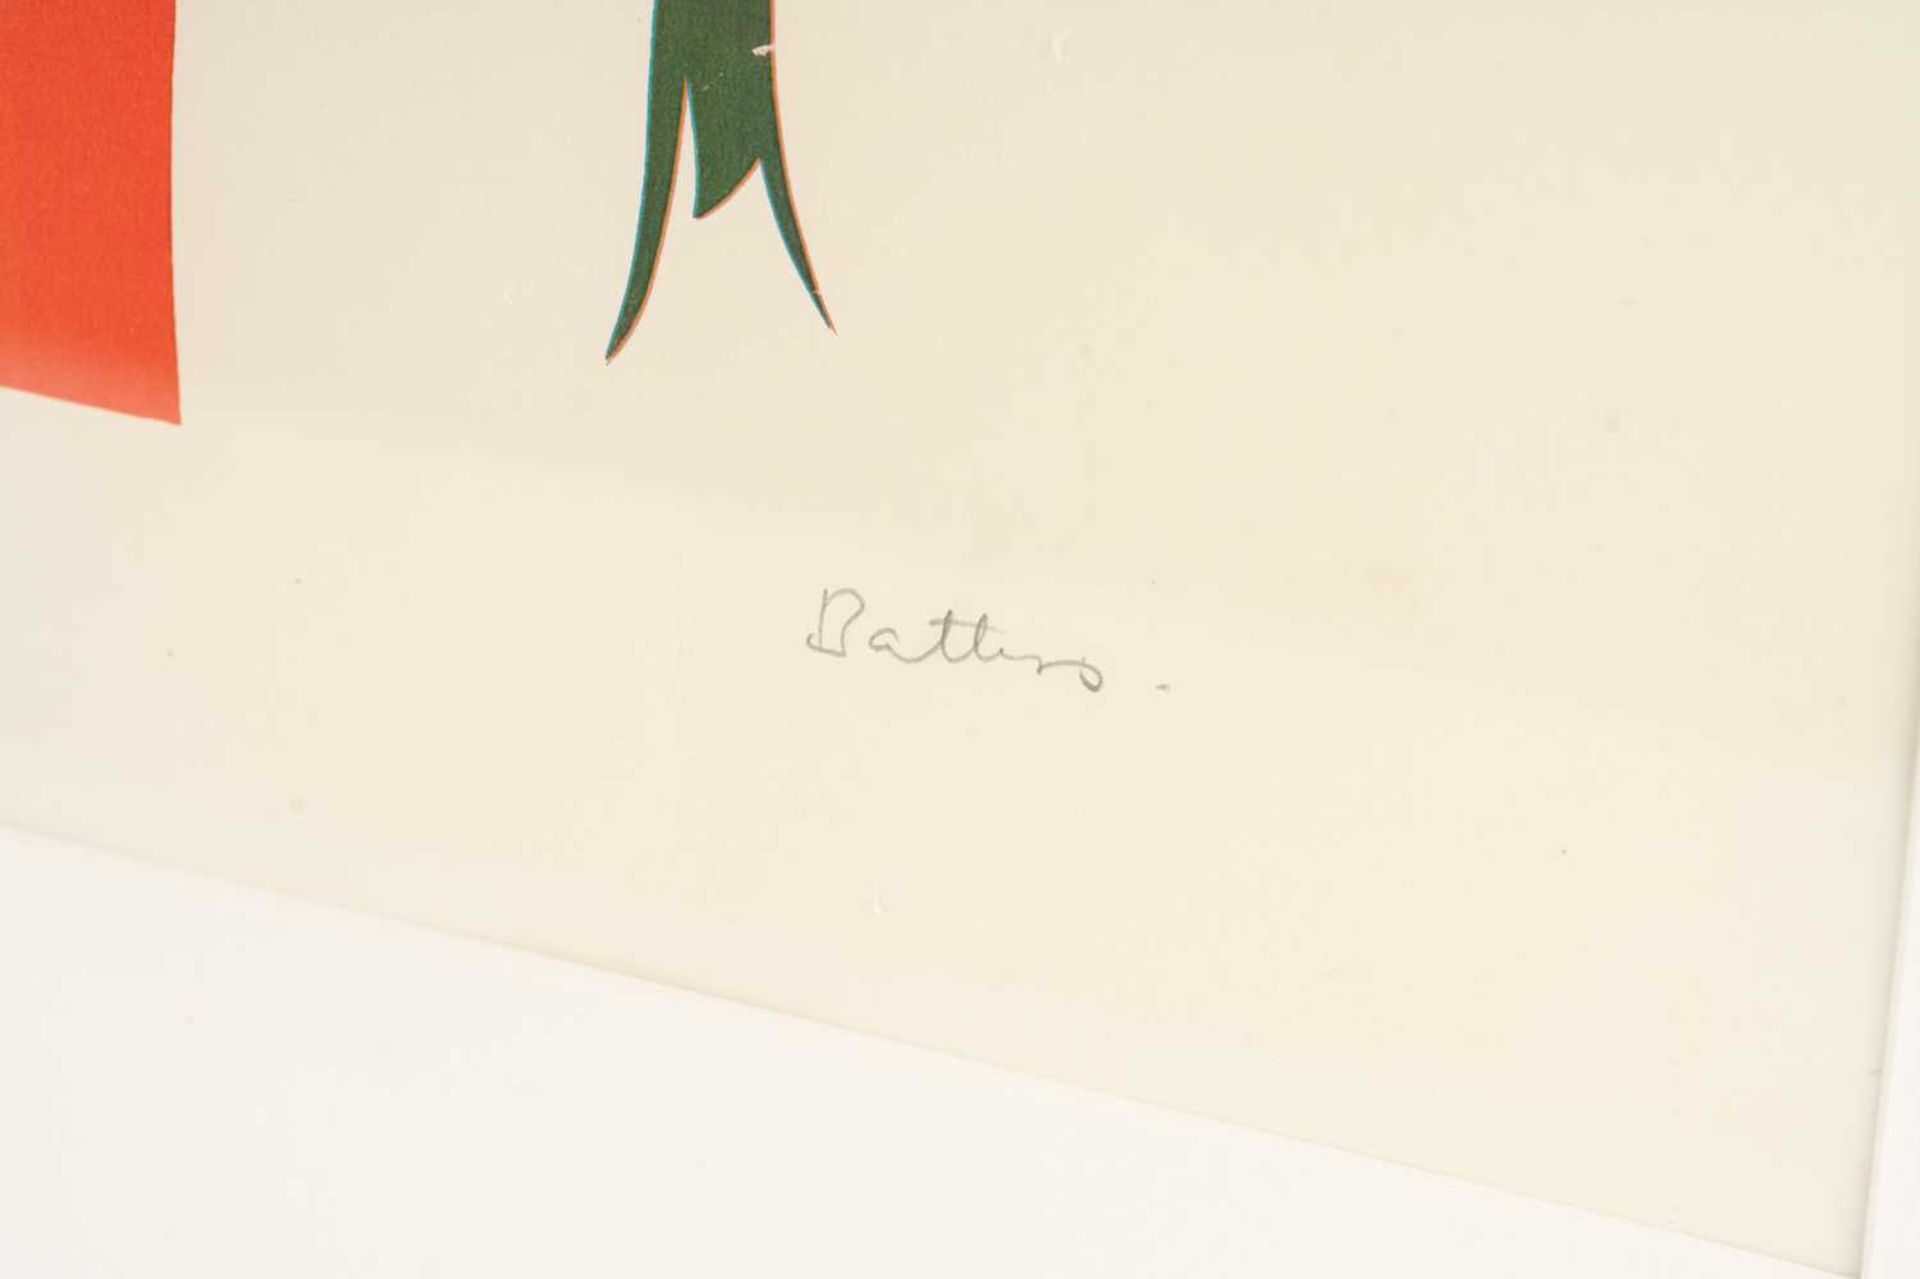 Walter Whall Batiss (1906-1982, South African) 'Don't', signed, inscribed and numbered 9/30 in - Image 2 of 8